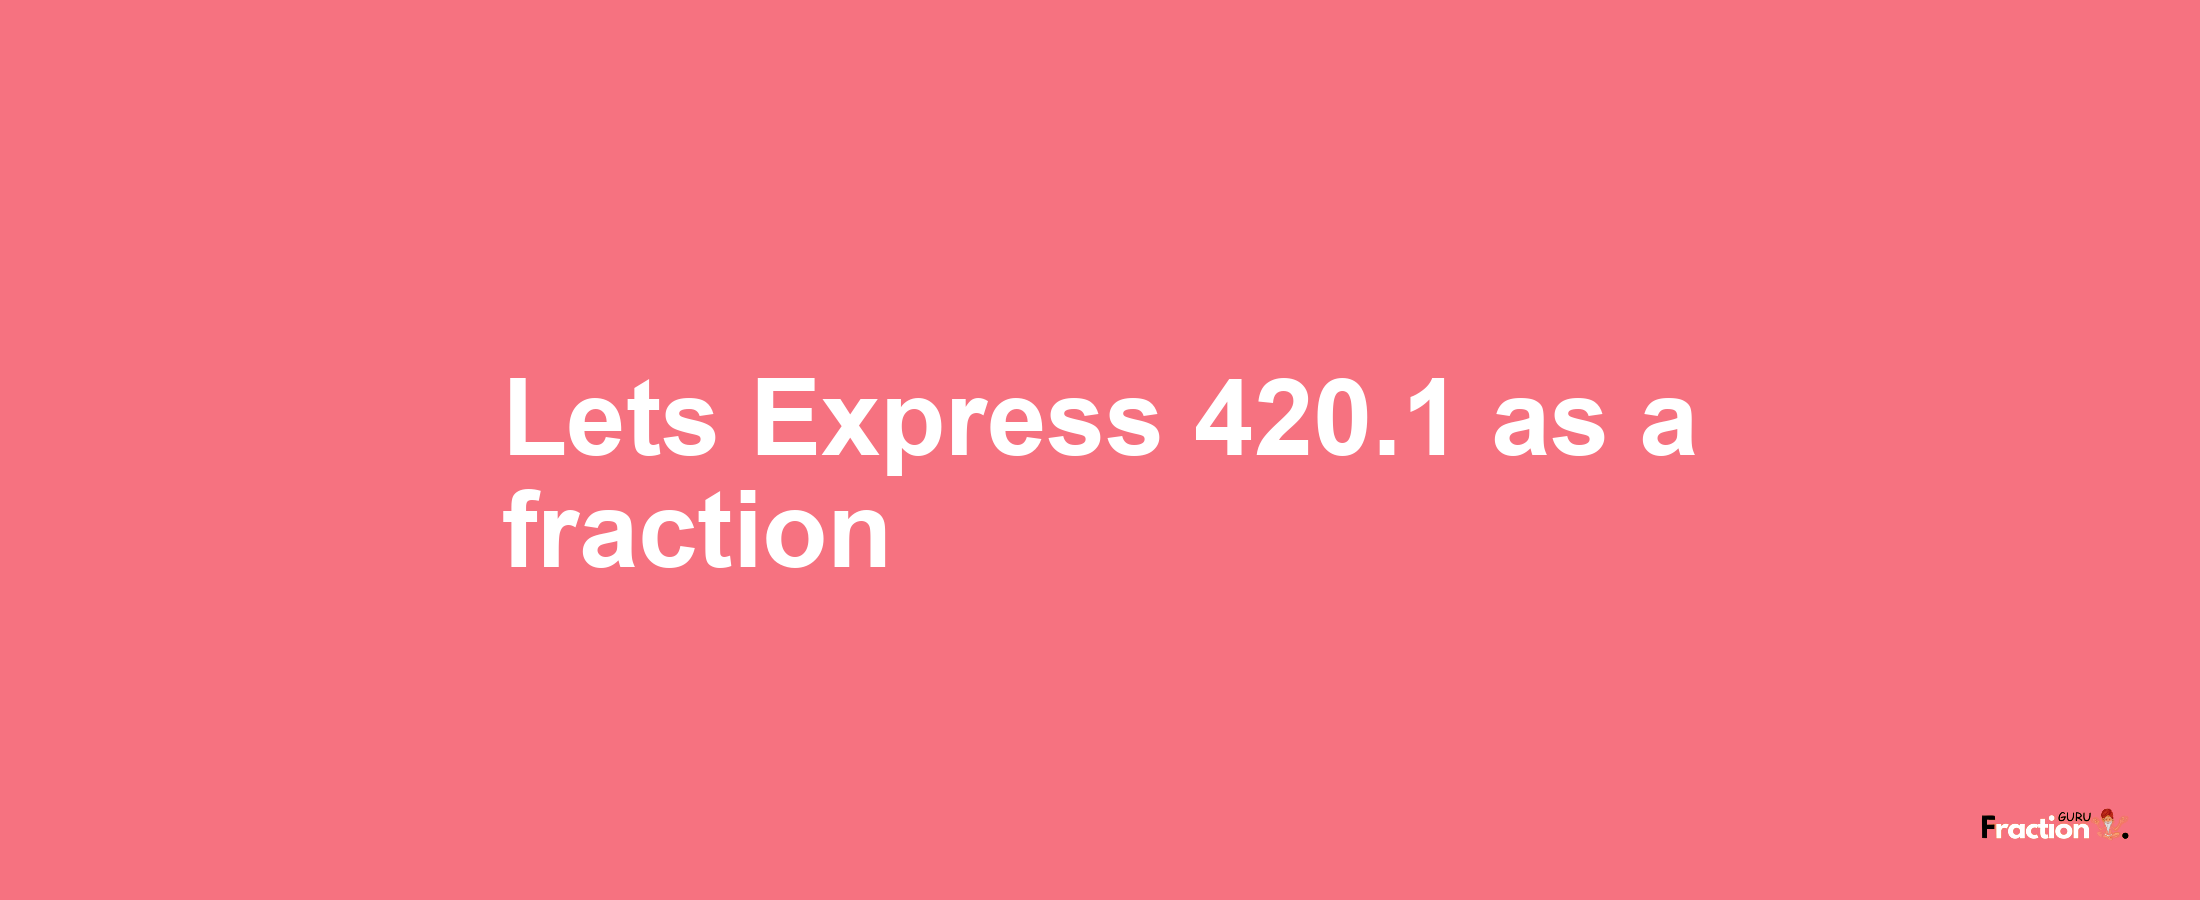 Lets Express 420.1 as afraction